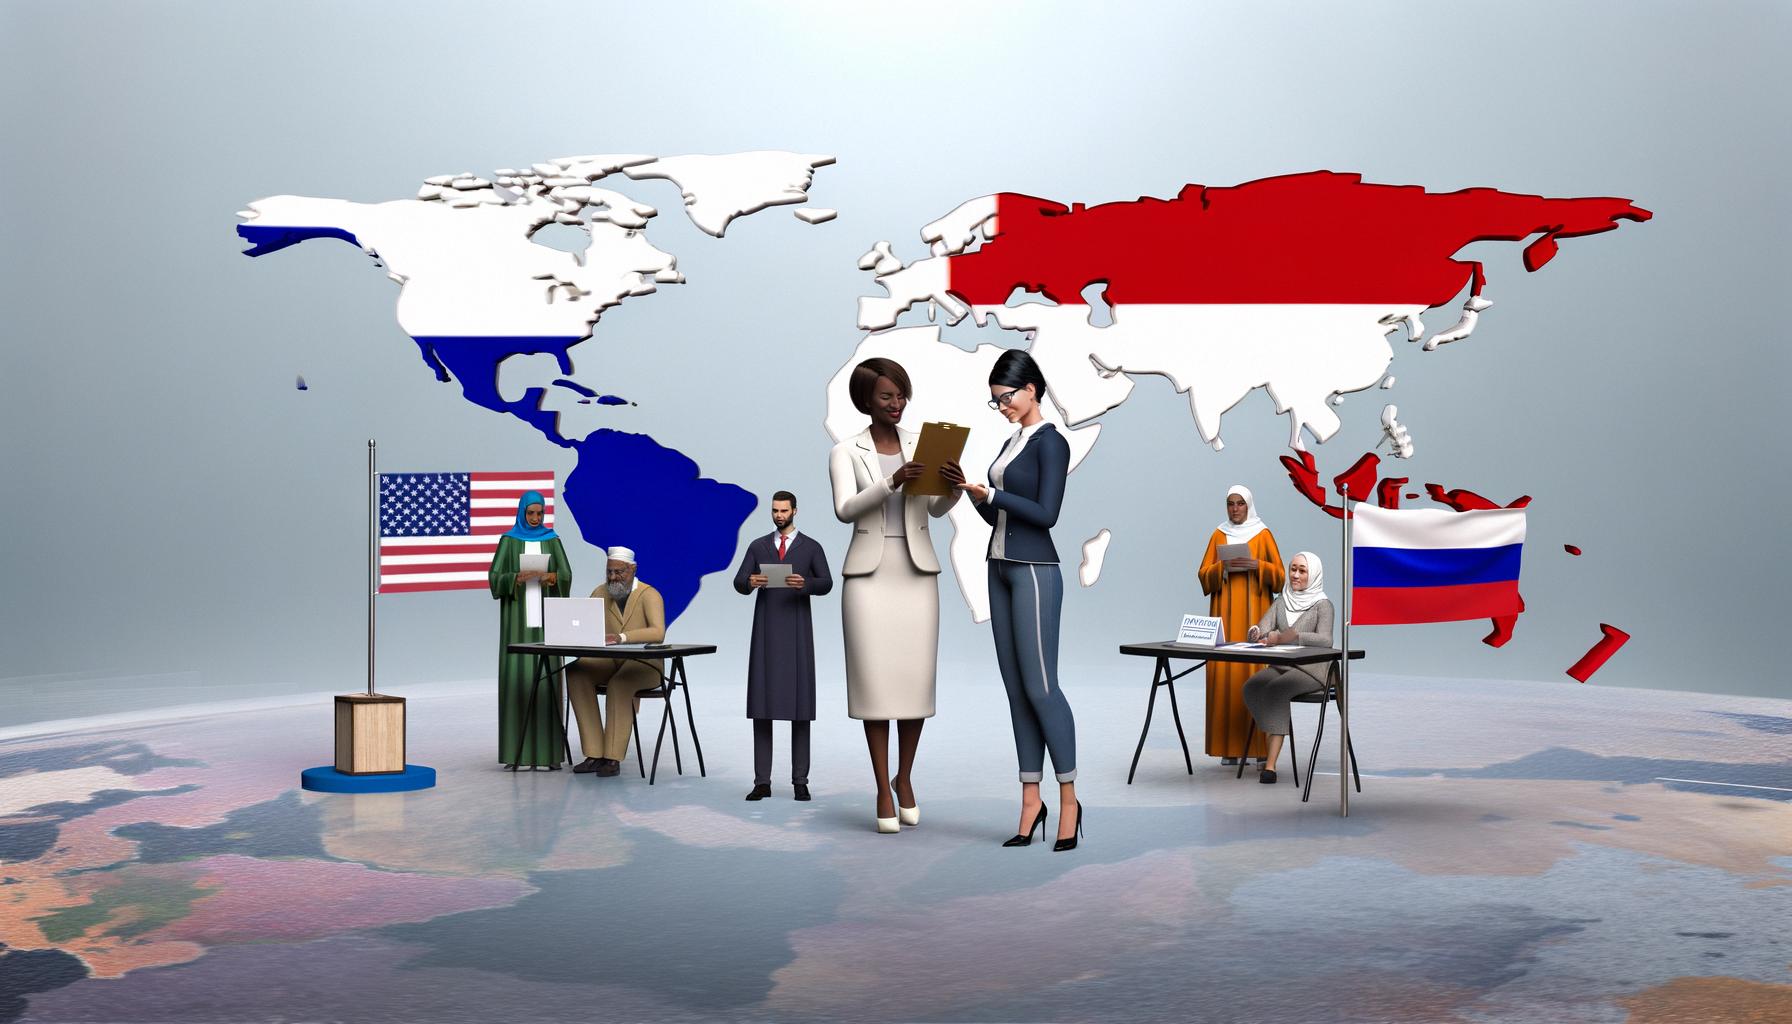 Focus on voter outreach and election campaigns globally Balanced News